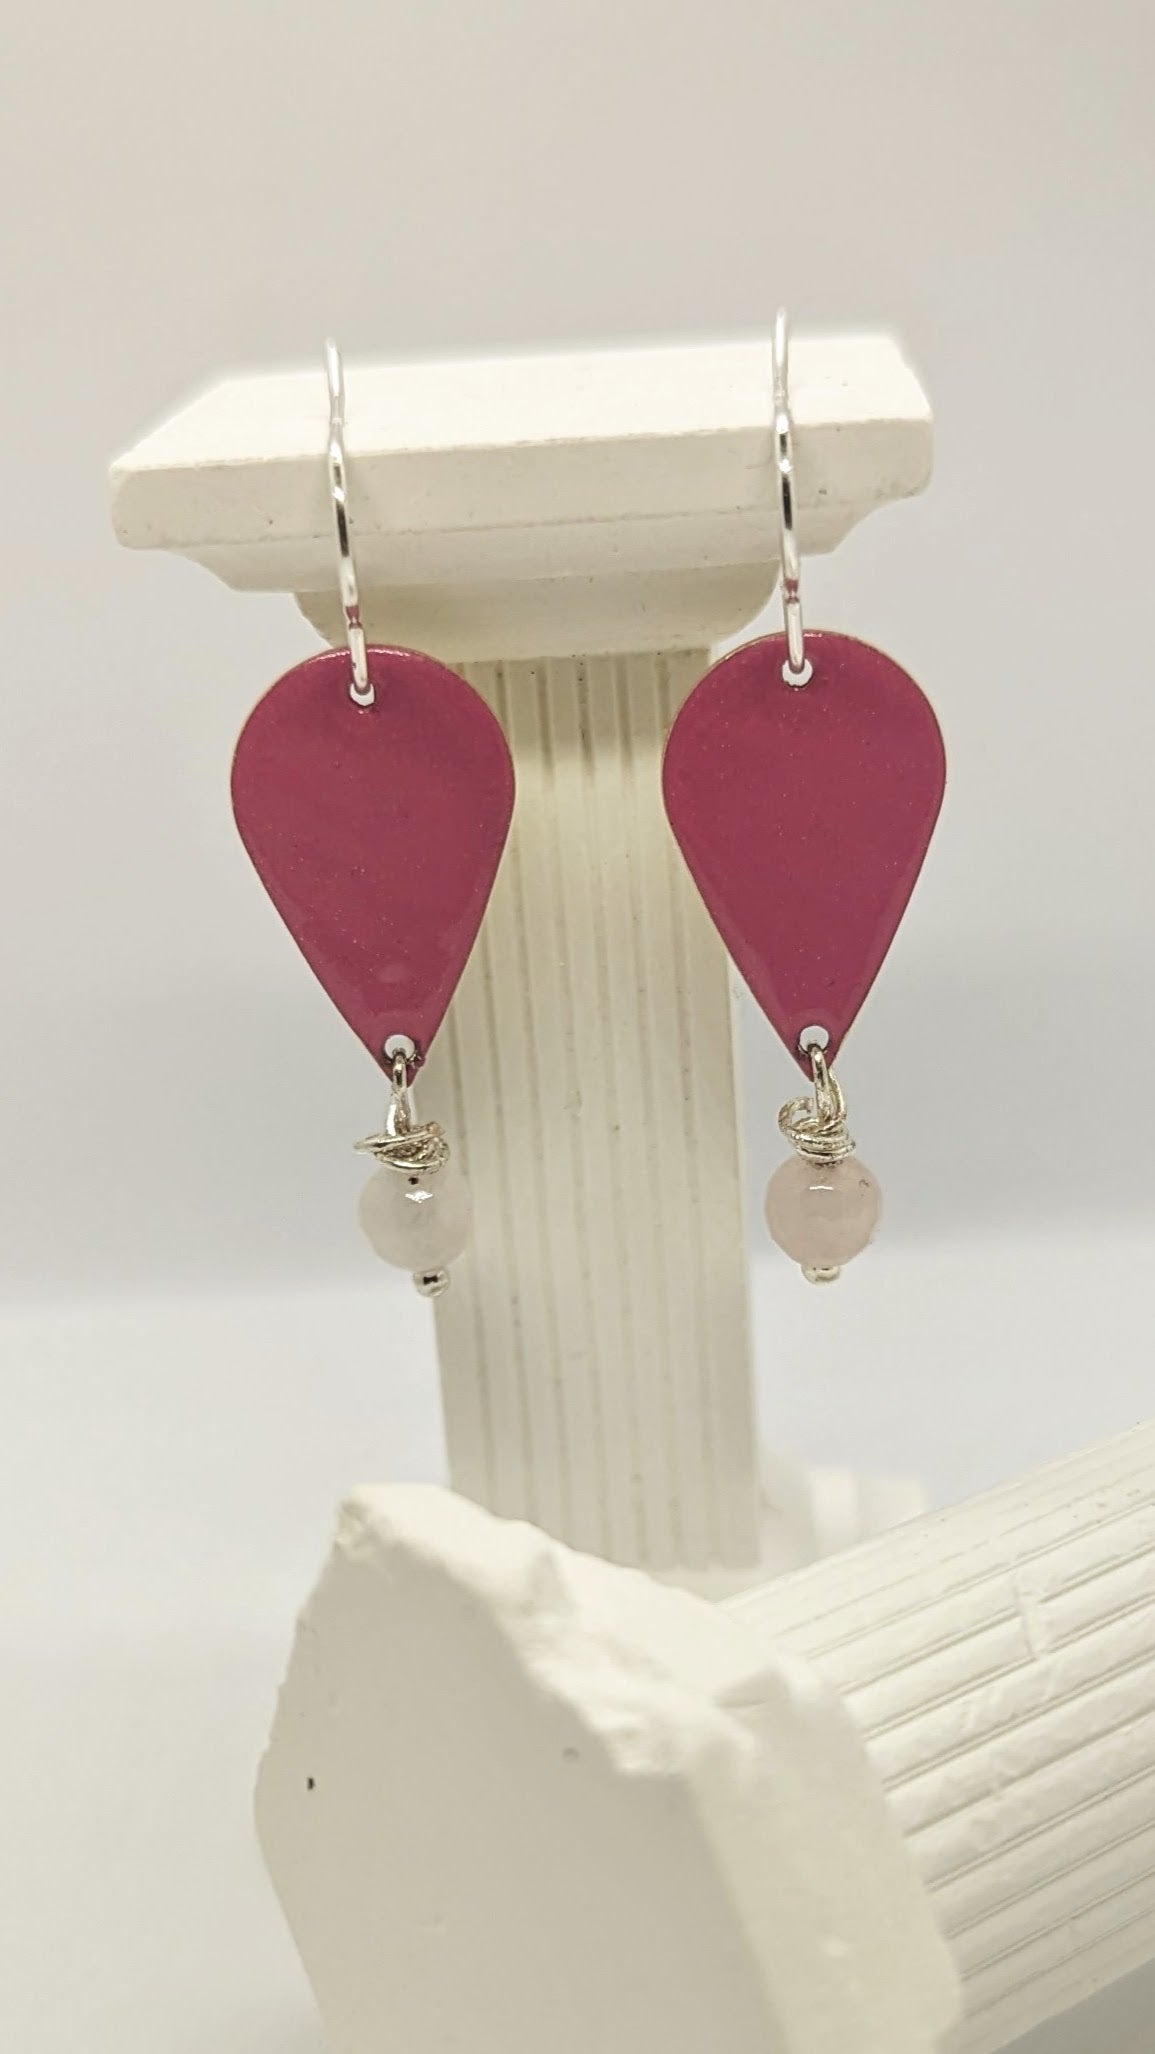 Earrings displayed on white columns. Enamelled tear drop brass in a pink colour embellished with a rose quartz each. The earrings are hanging from sterling silver earring hooks.